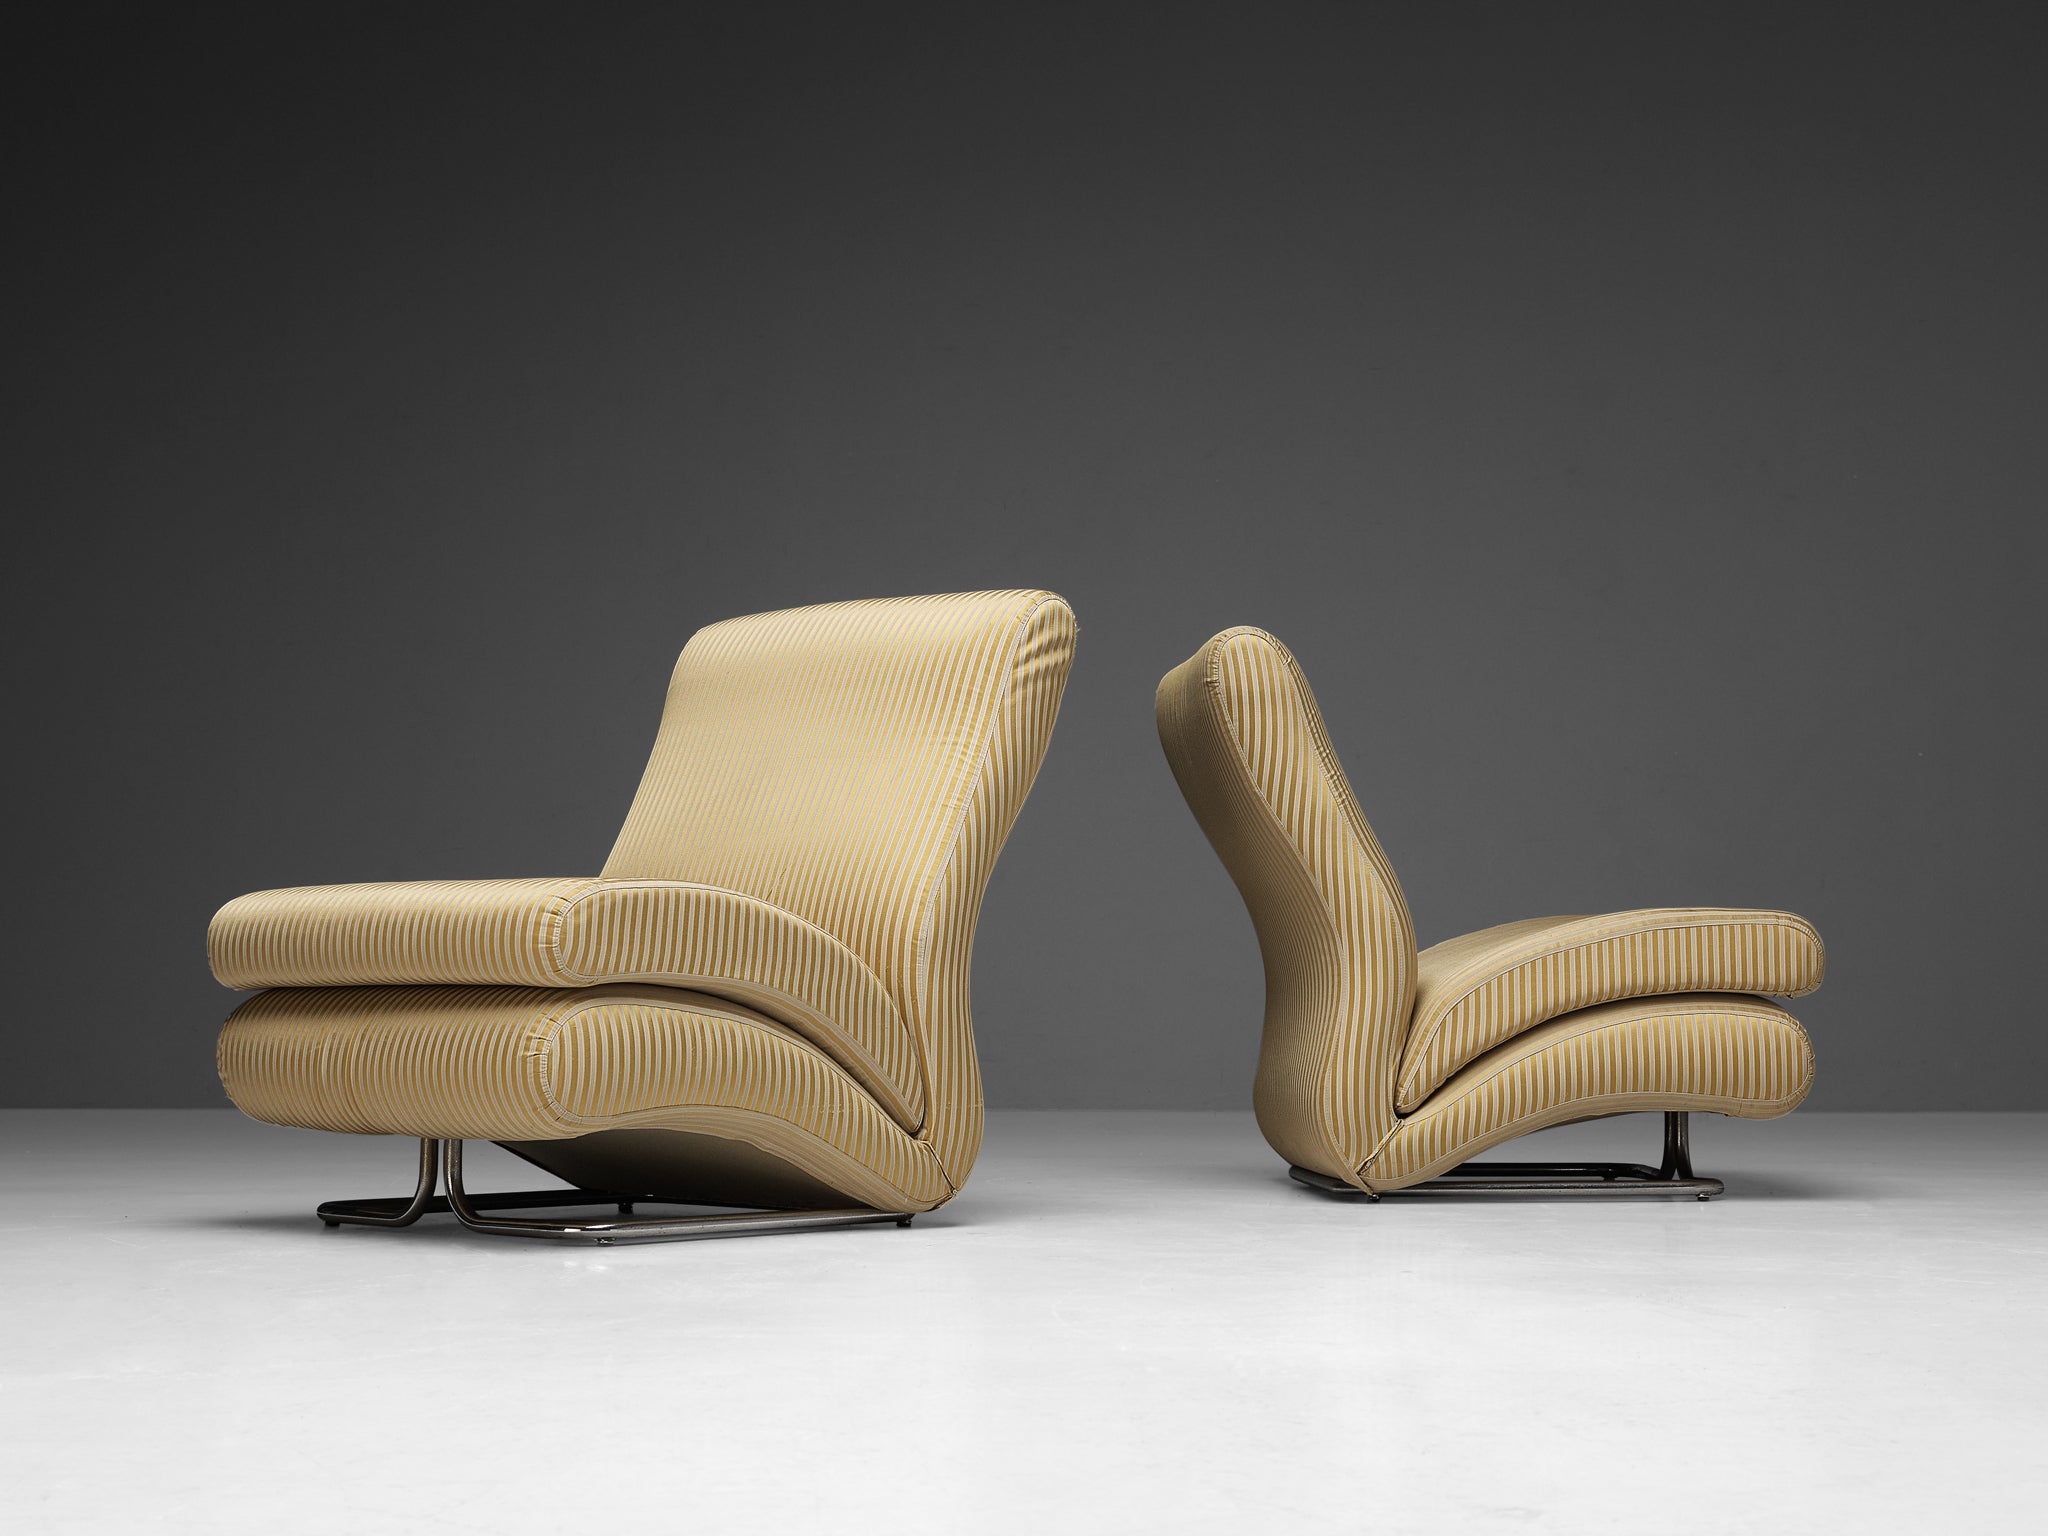 Vittorio Varo for I.P.E. 'Cigno' Lounge Chairs in Striped Upholstery